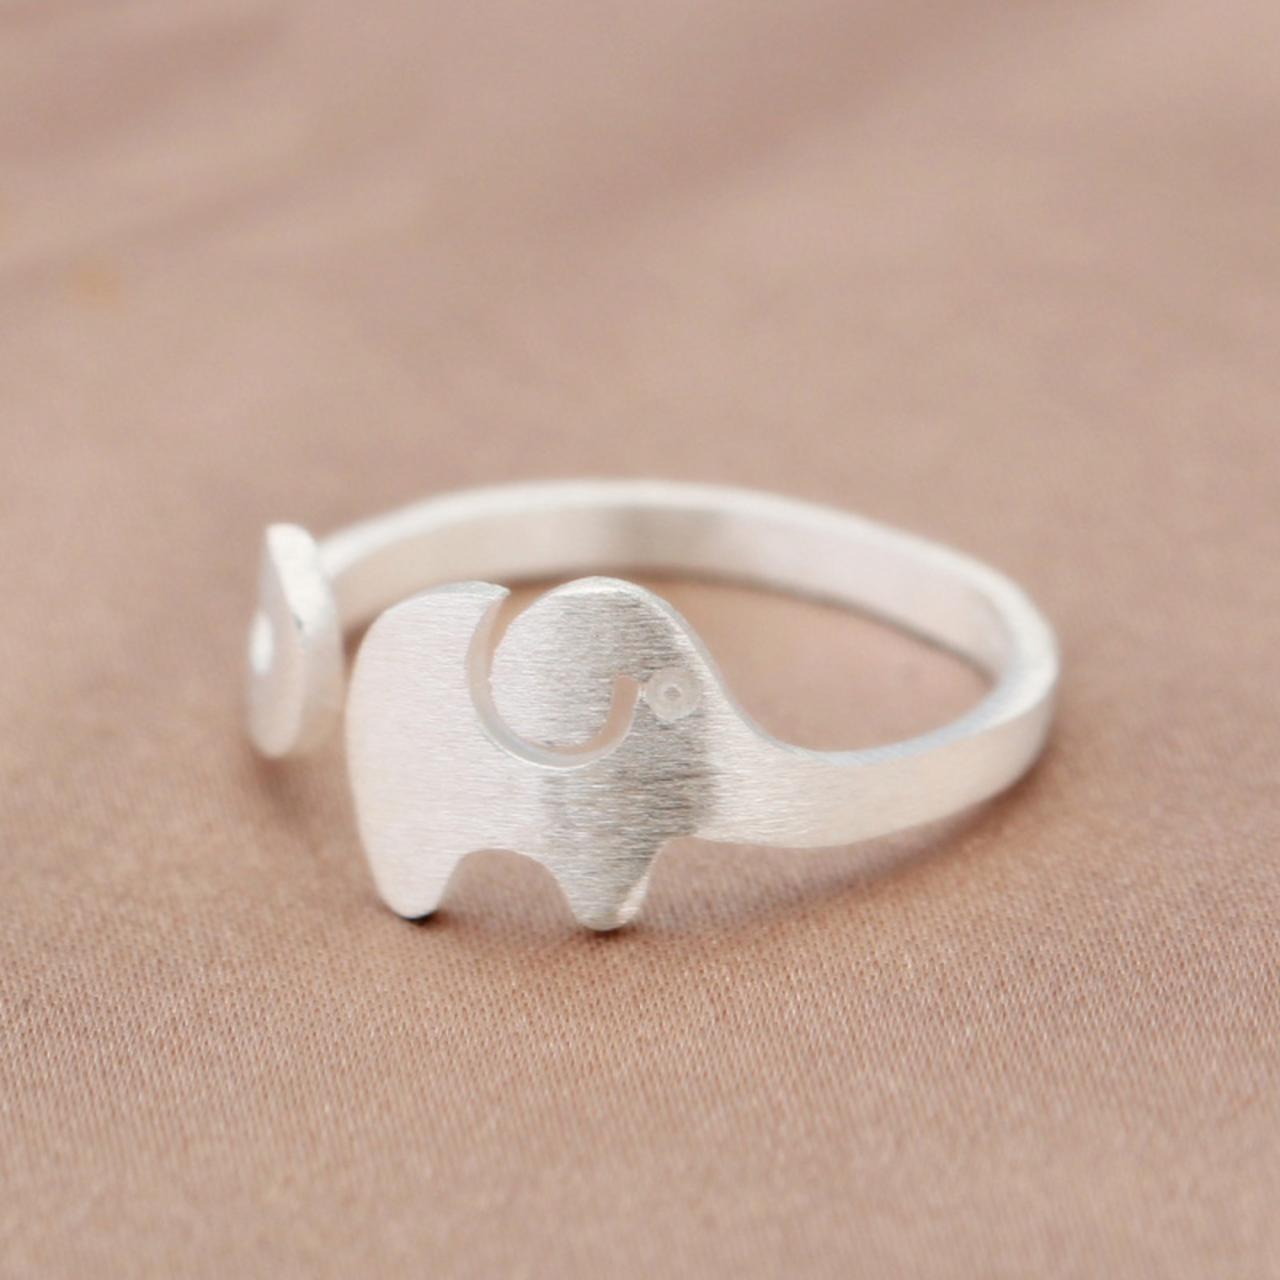 Filigree Elephant, Sterling Silver Adjustable Elephant Ring, Minimalist Rings, Dainty Ring, Women Ring, Everyday Jewelry